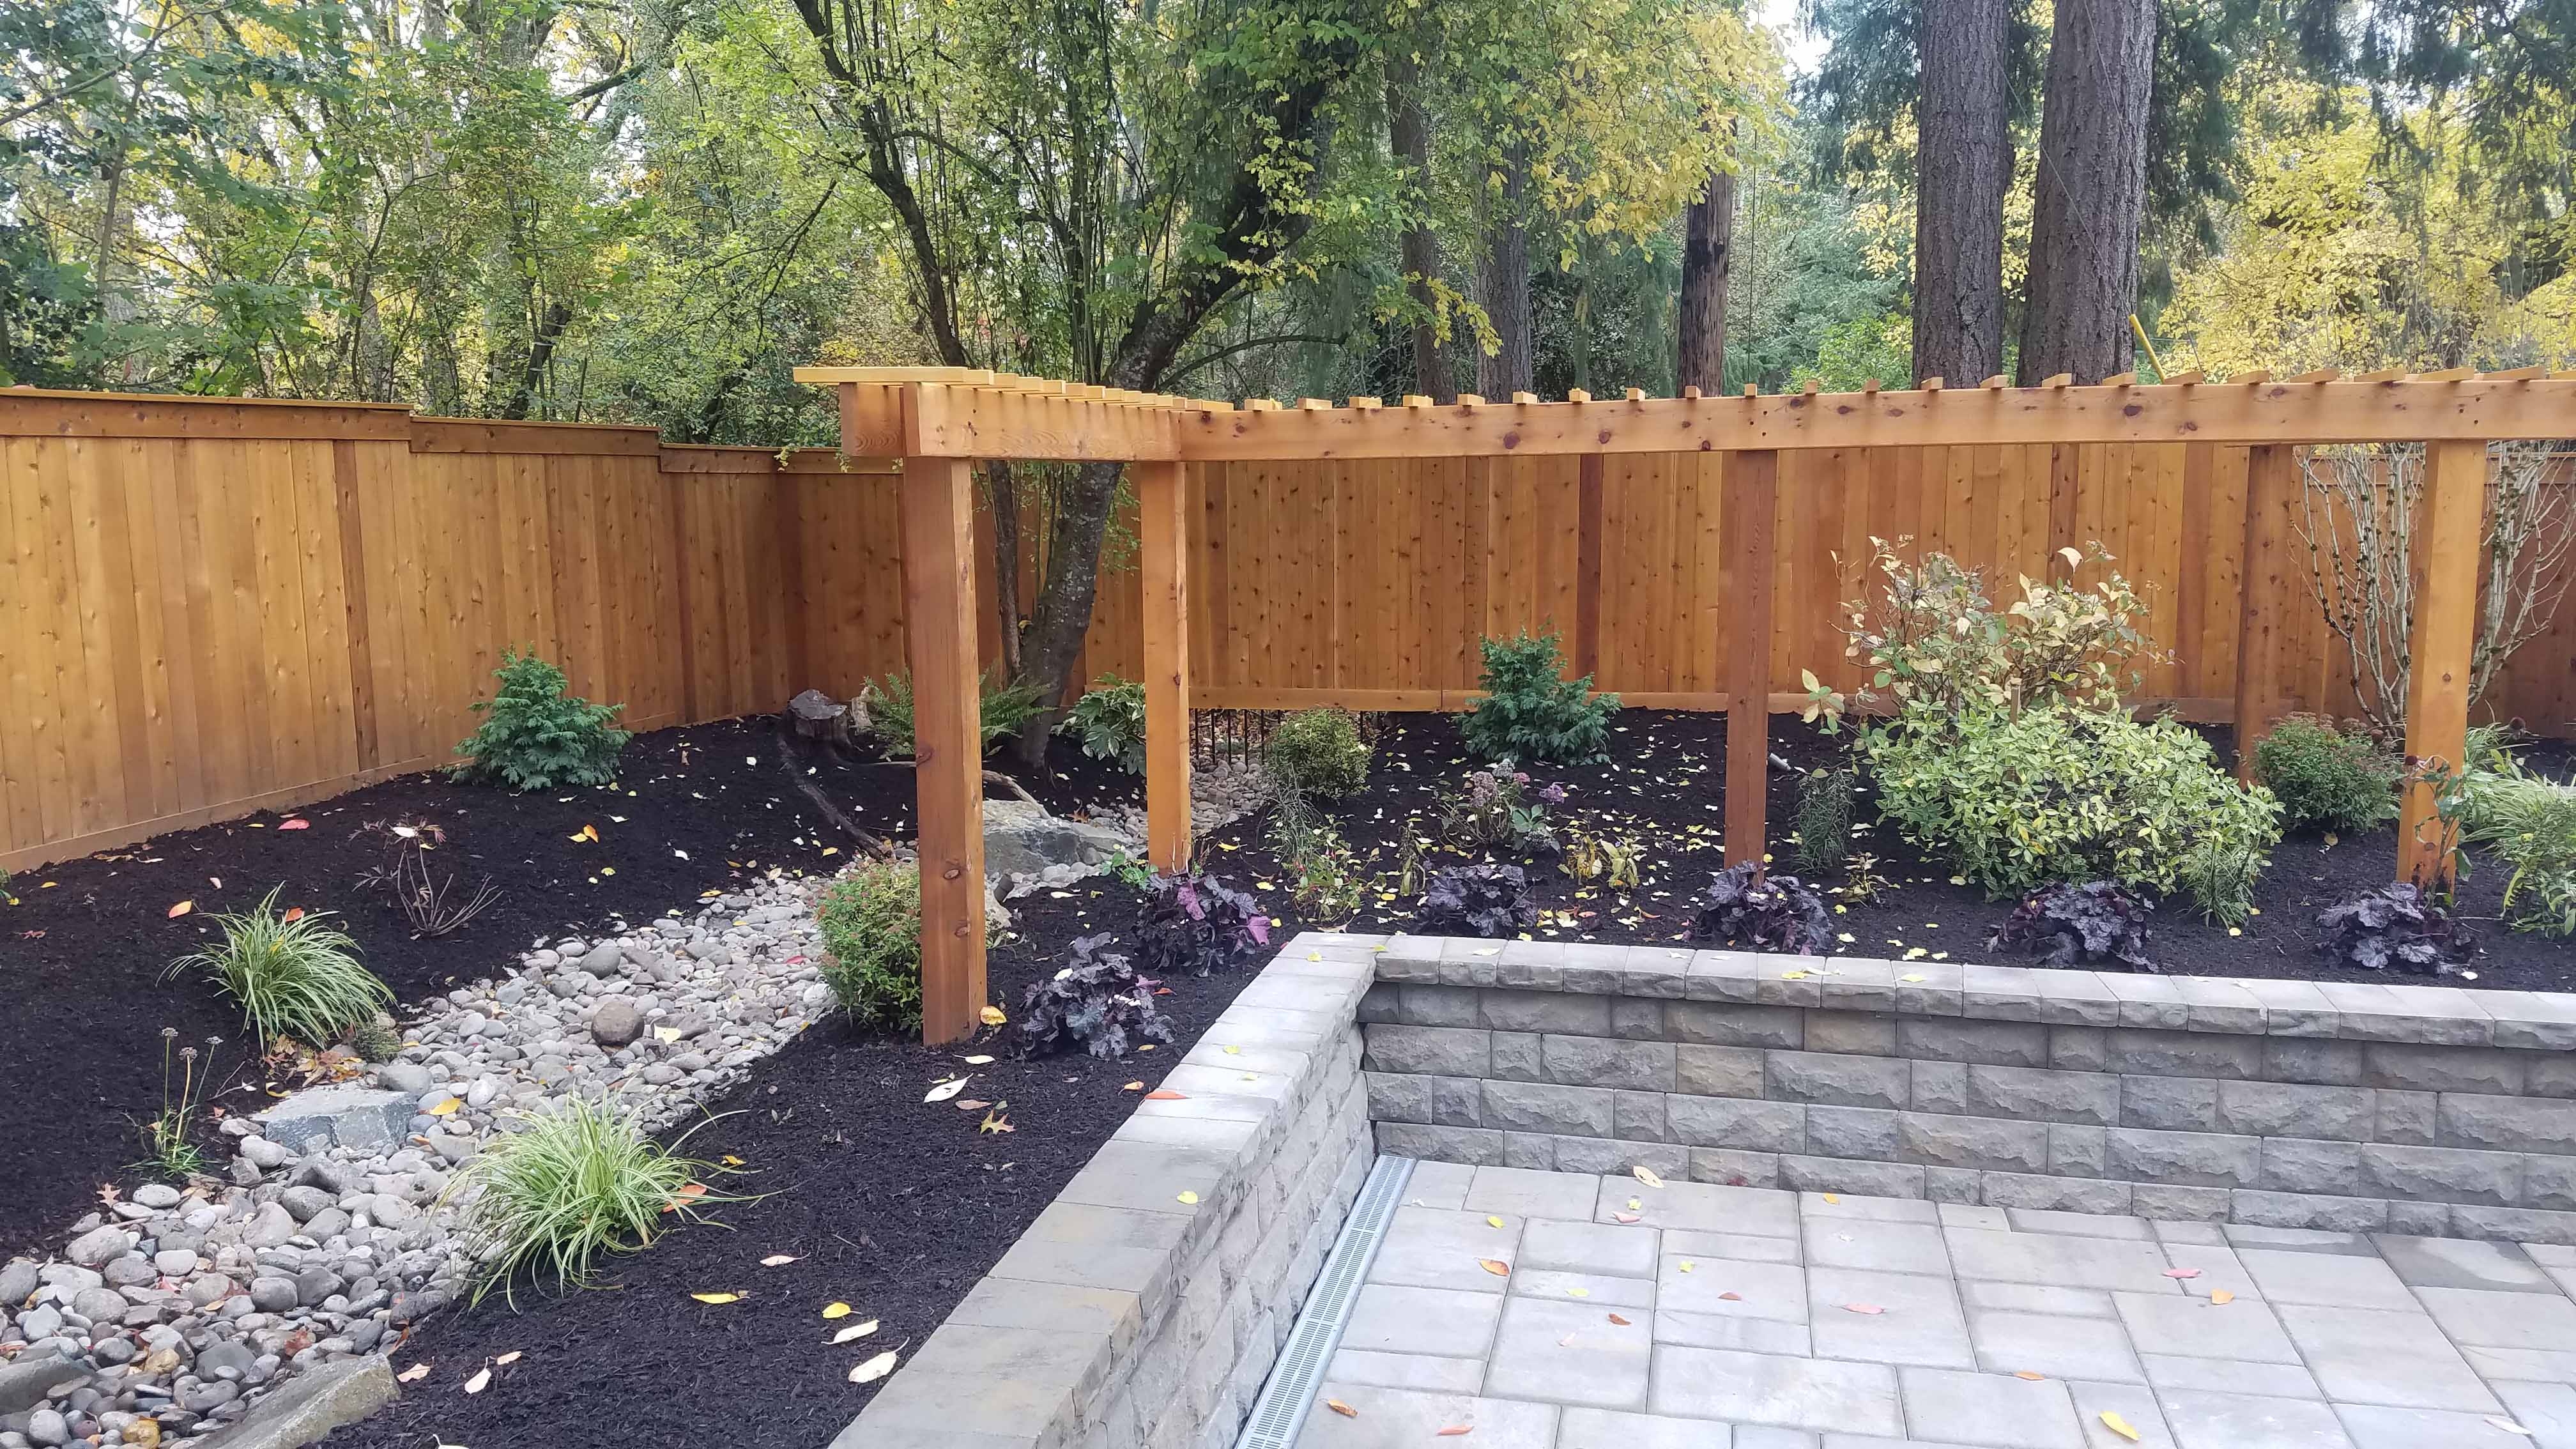 Fully remodeled backyard landscape with cement walkways, metal railings, dirt beds, gravel beds and newly planted trees with ring retaining walls